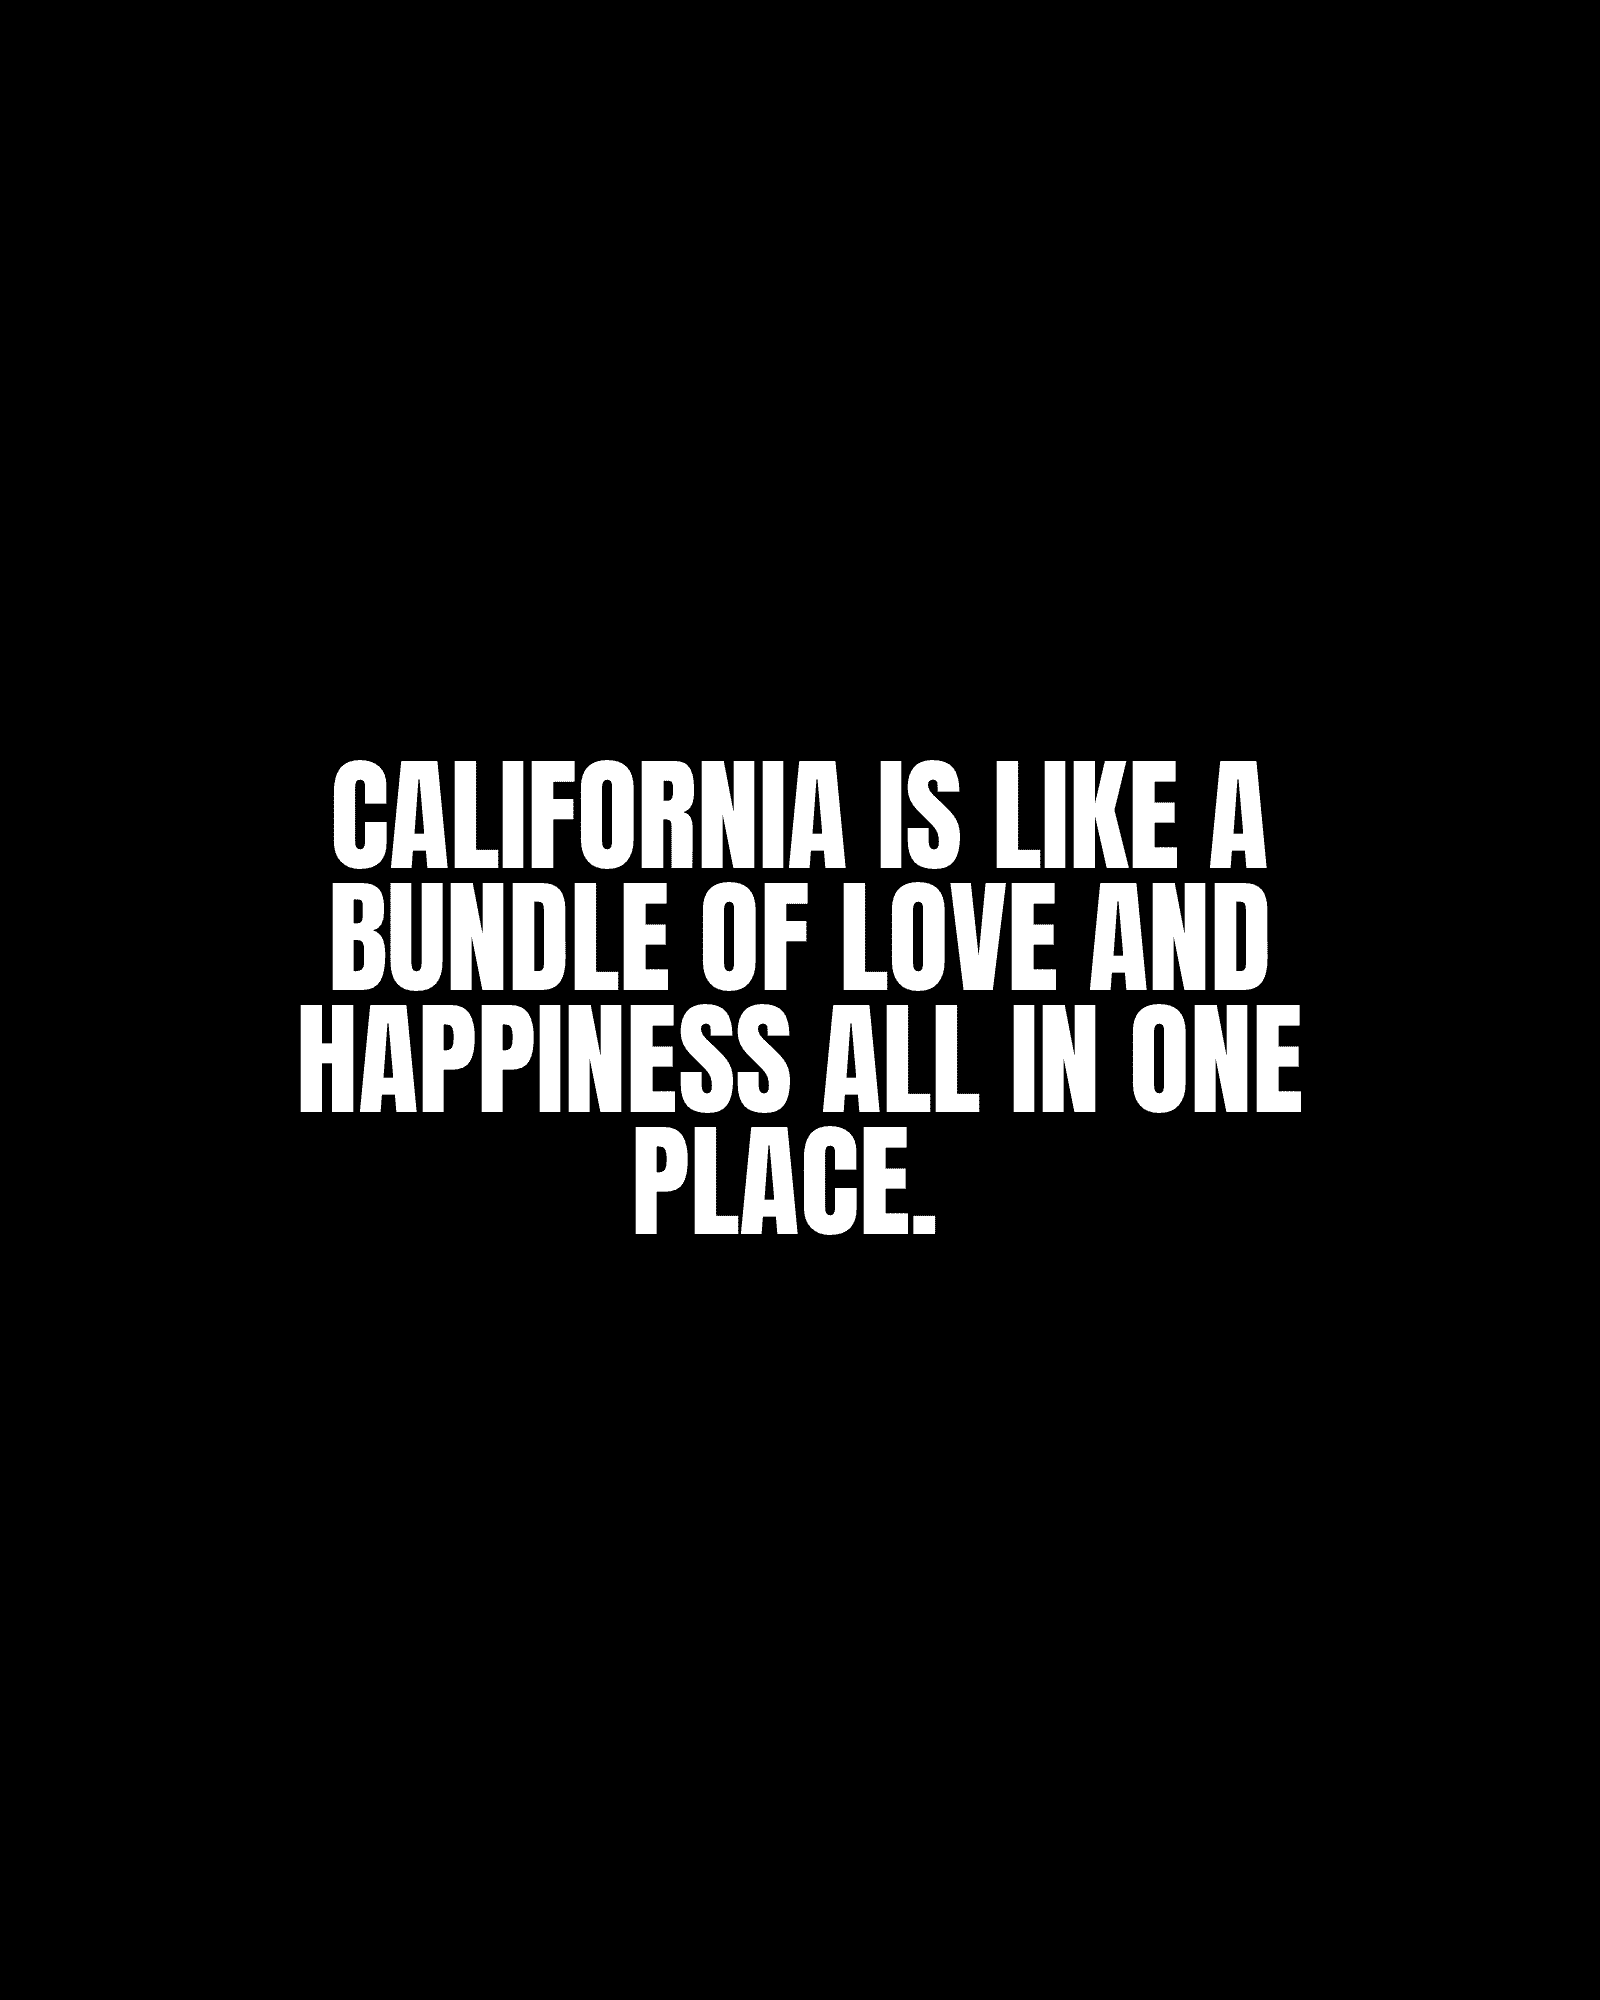 California is like a bundle of love and happiness all in one place.